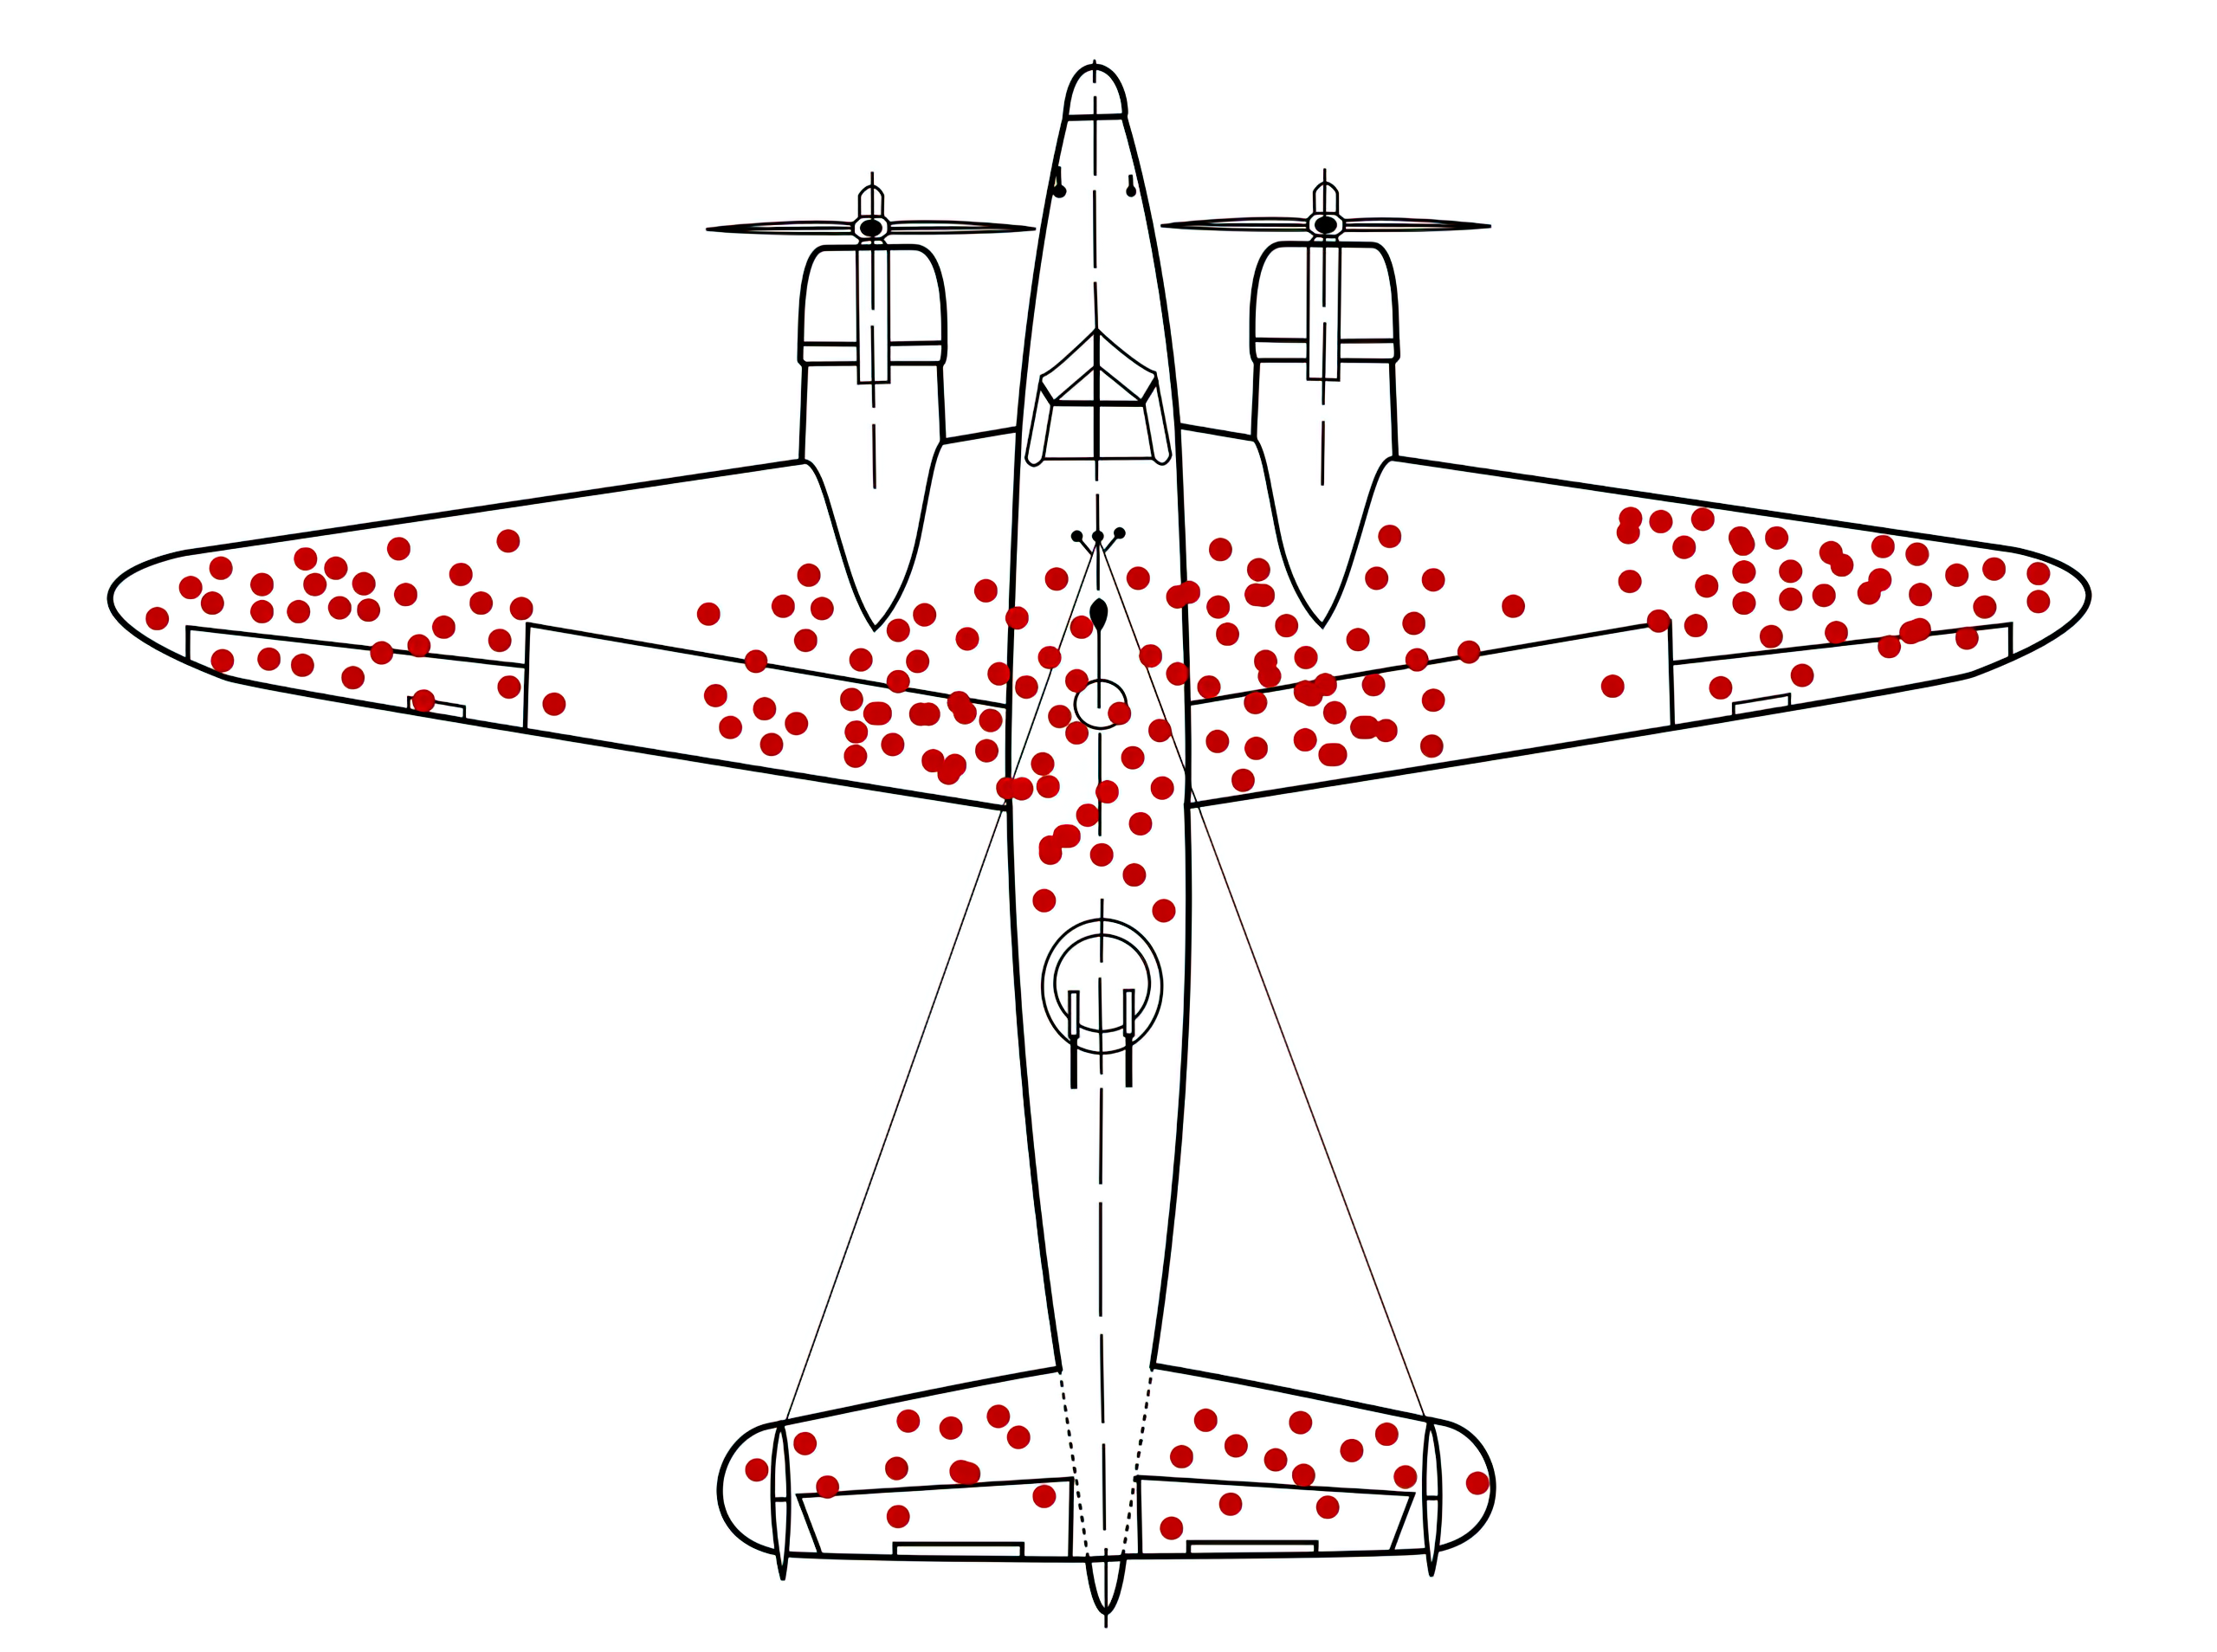 The damaged portions of returning planes show locations where they can sustain damage and still return home; those hit in other places presumedly do not survive. (Image shows hypothetical data.)